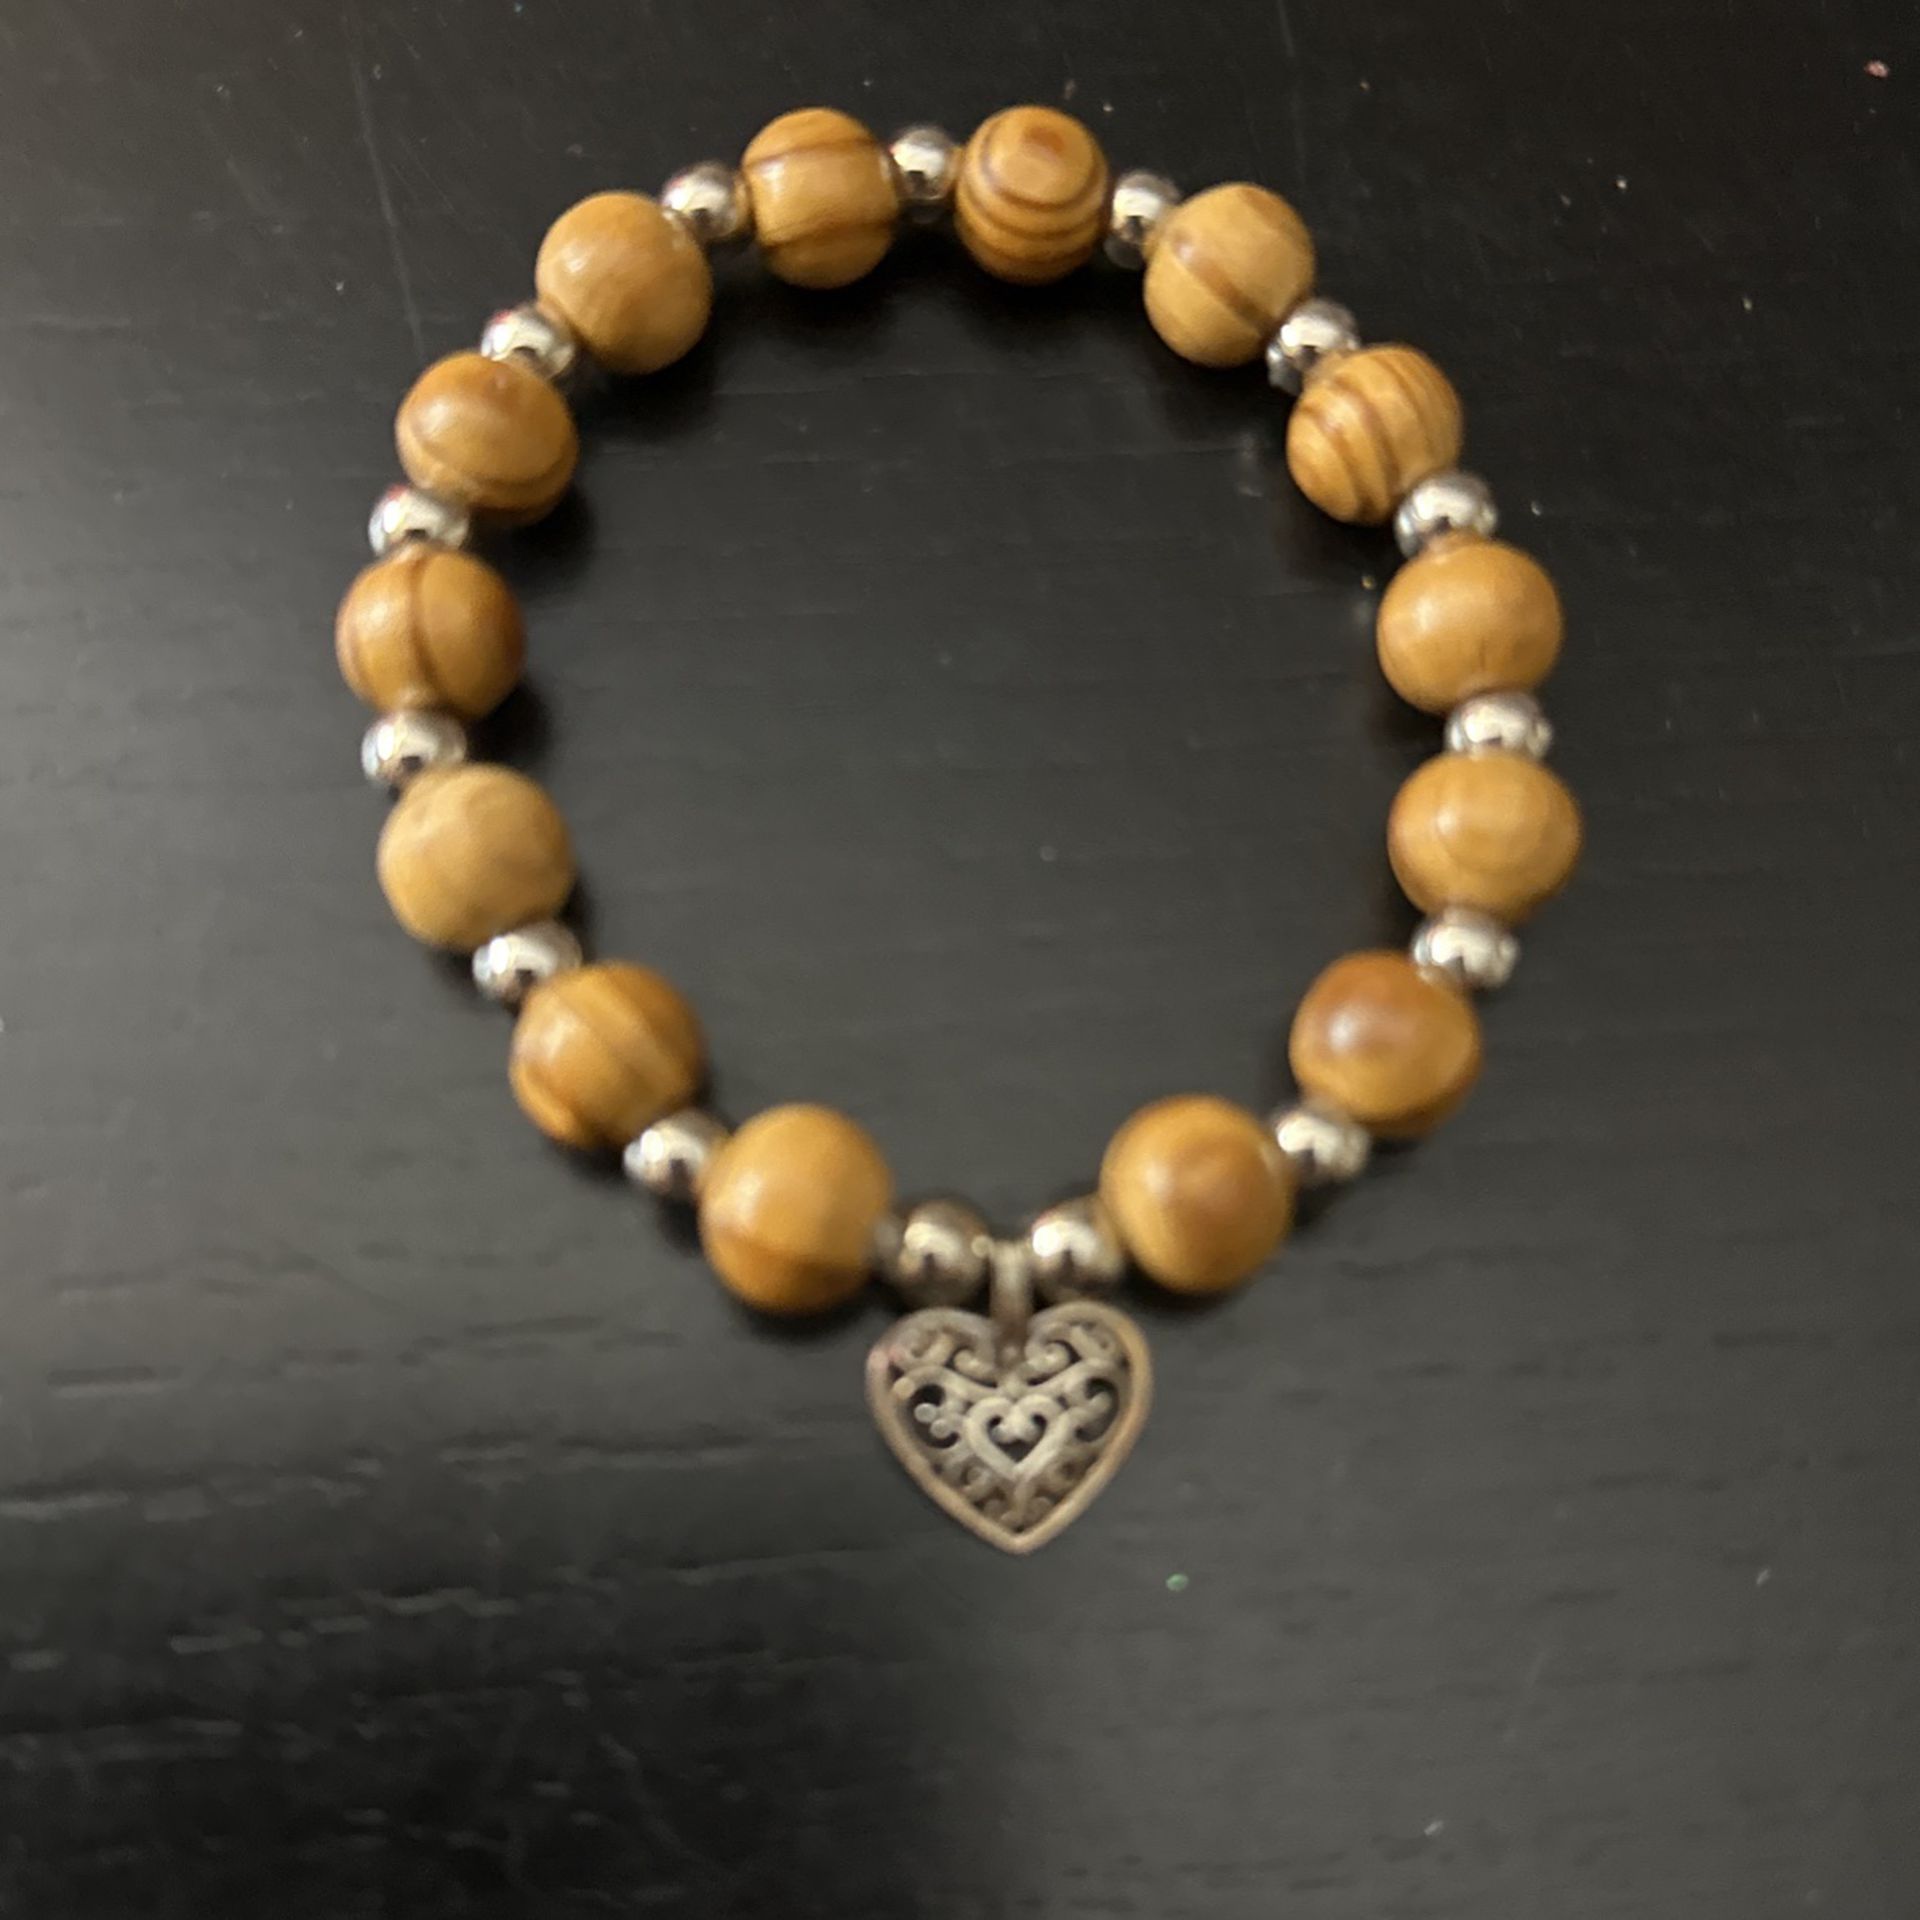 Wood And Silver Beads Bracelet With A Heart Charm